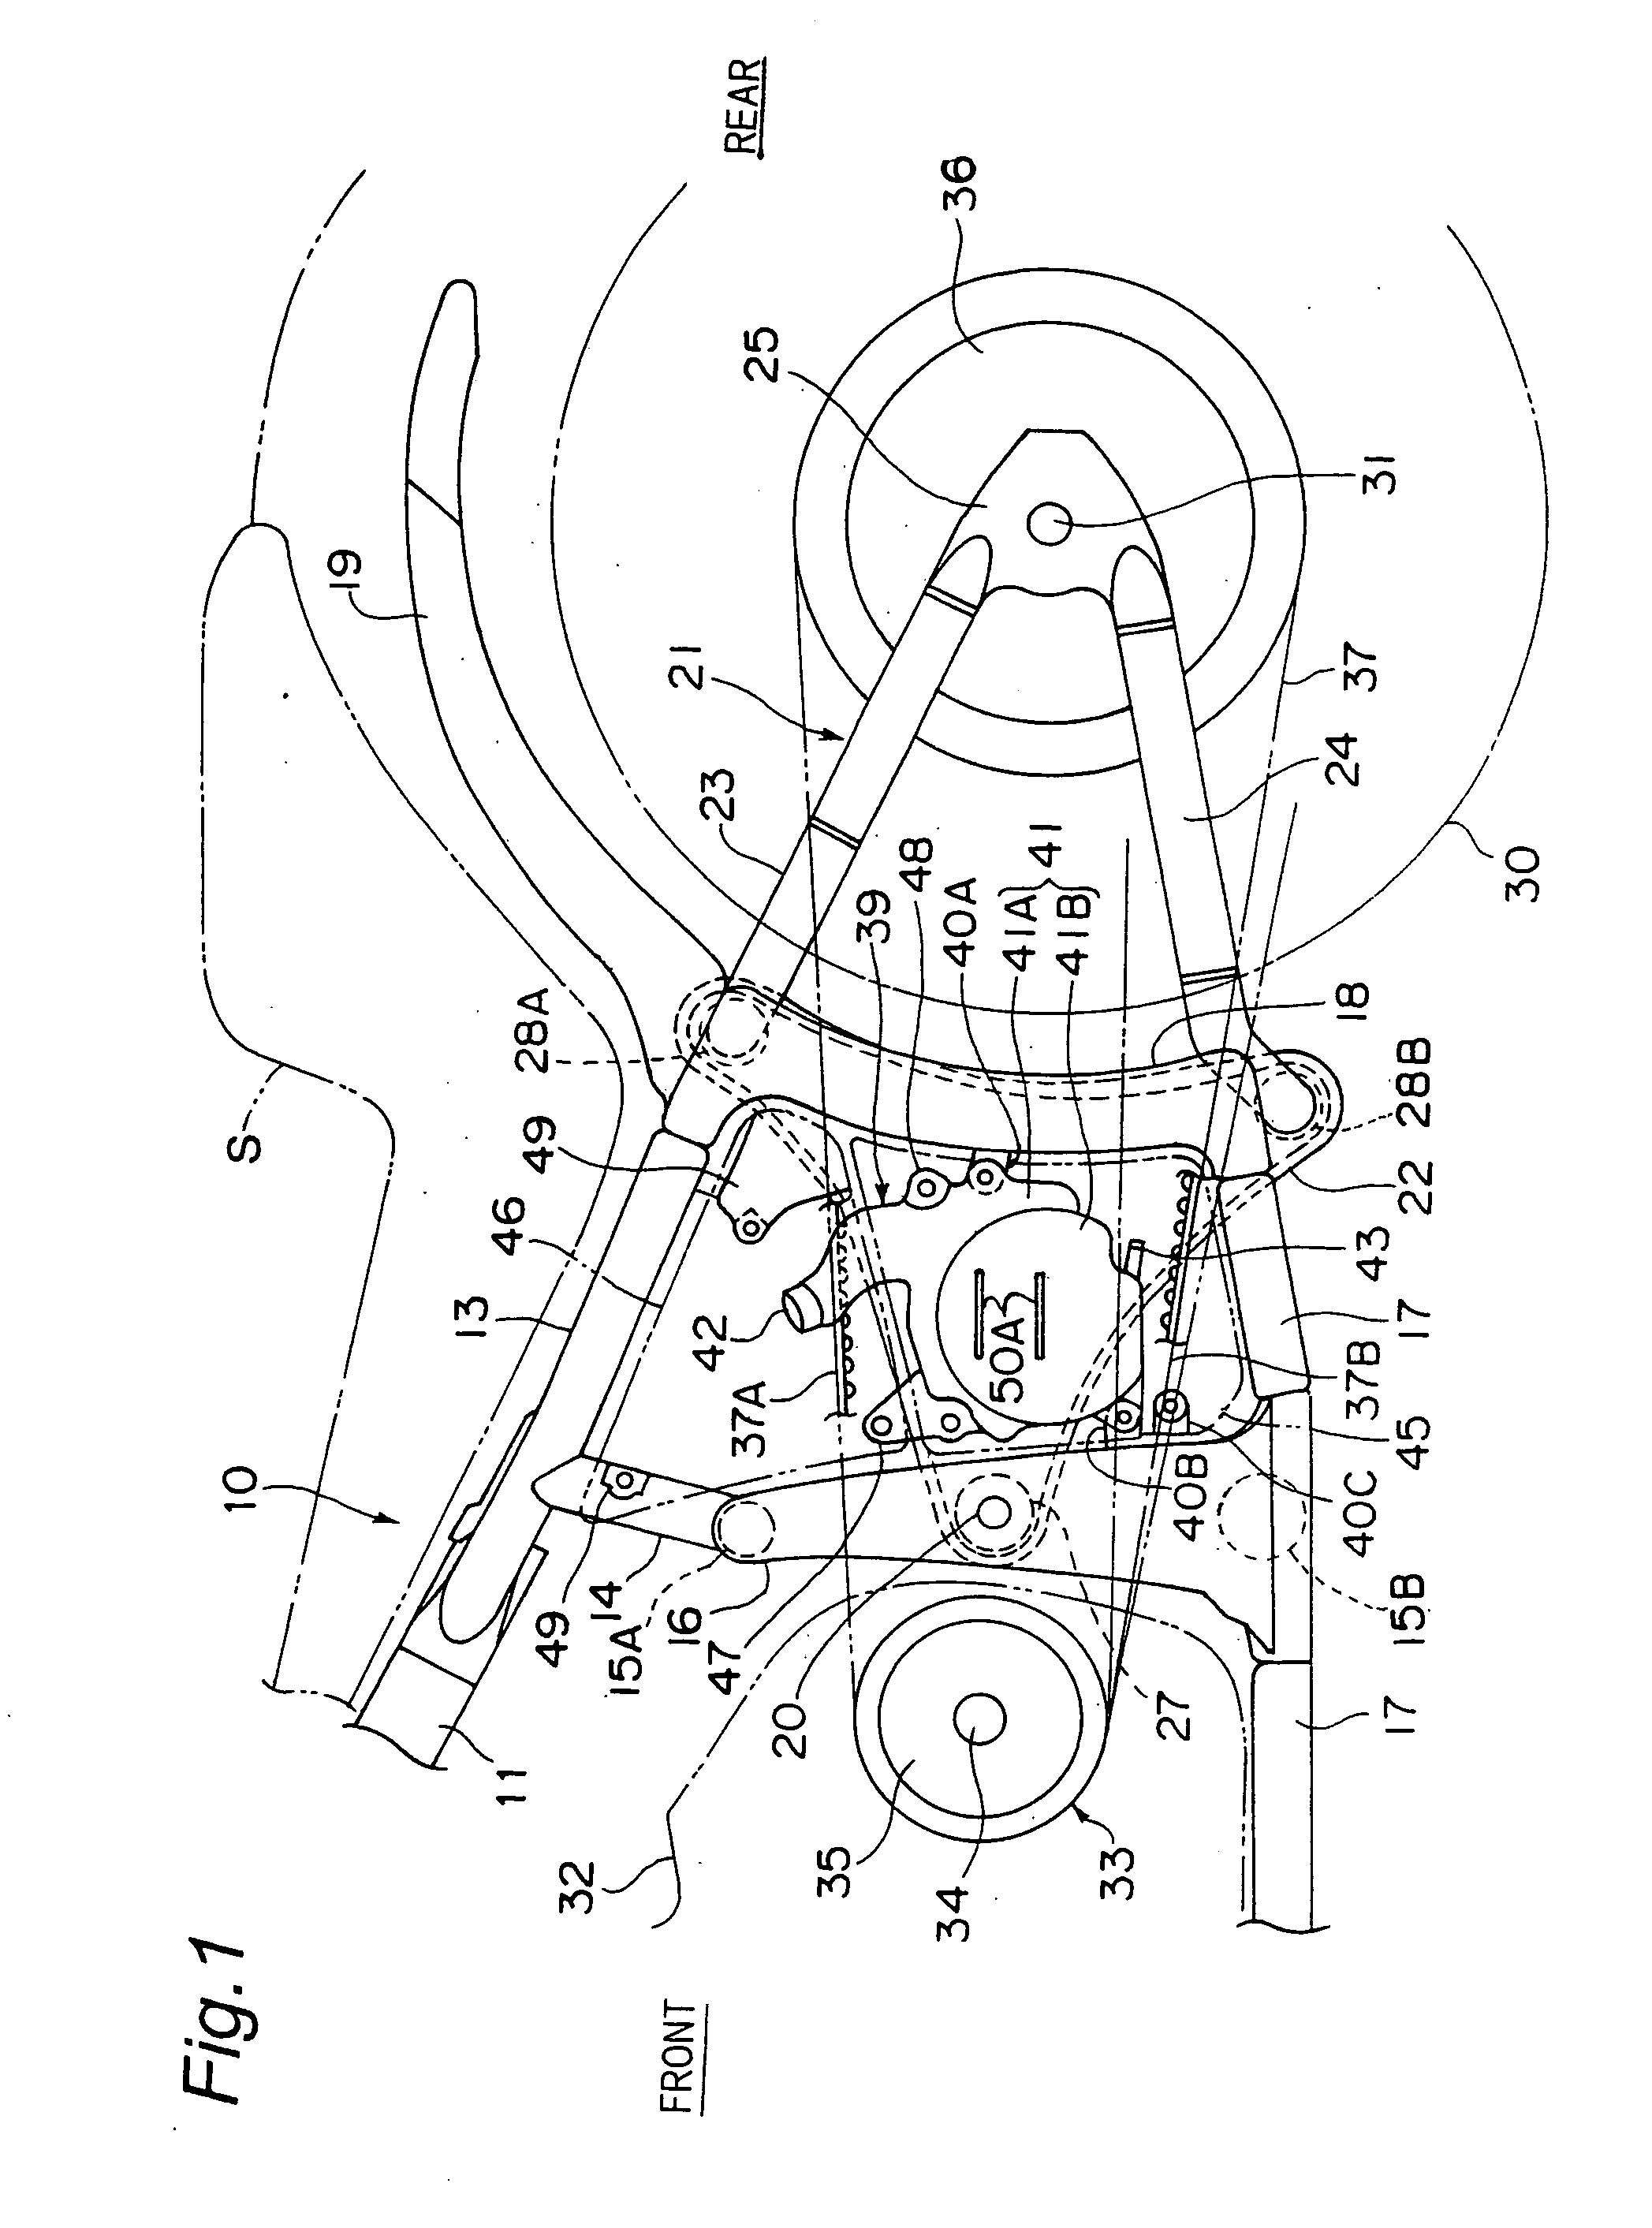 Reserve tank layout structure of motorcycle